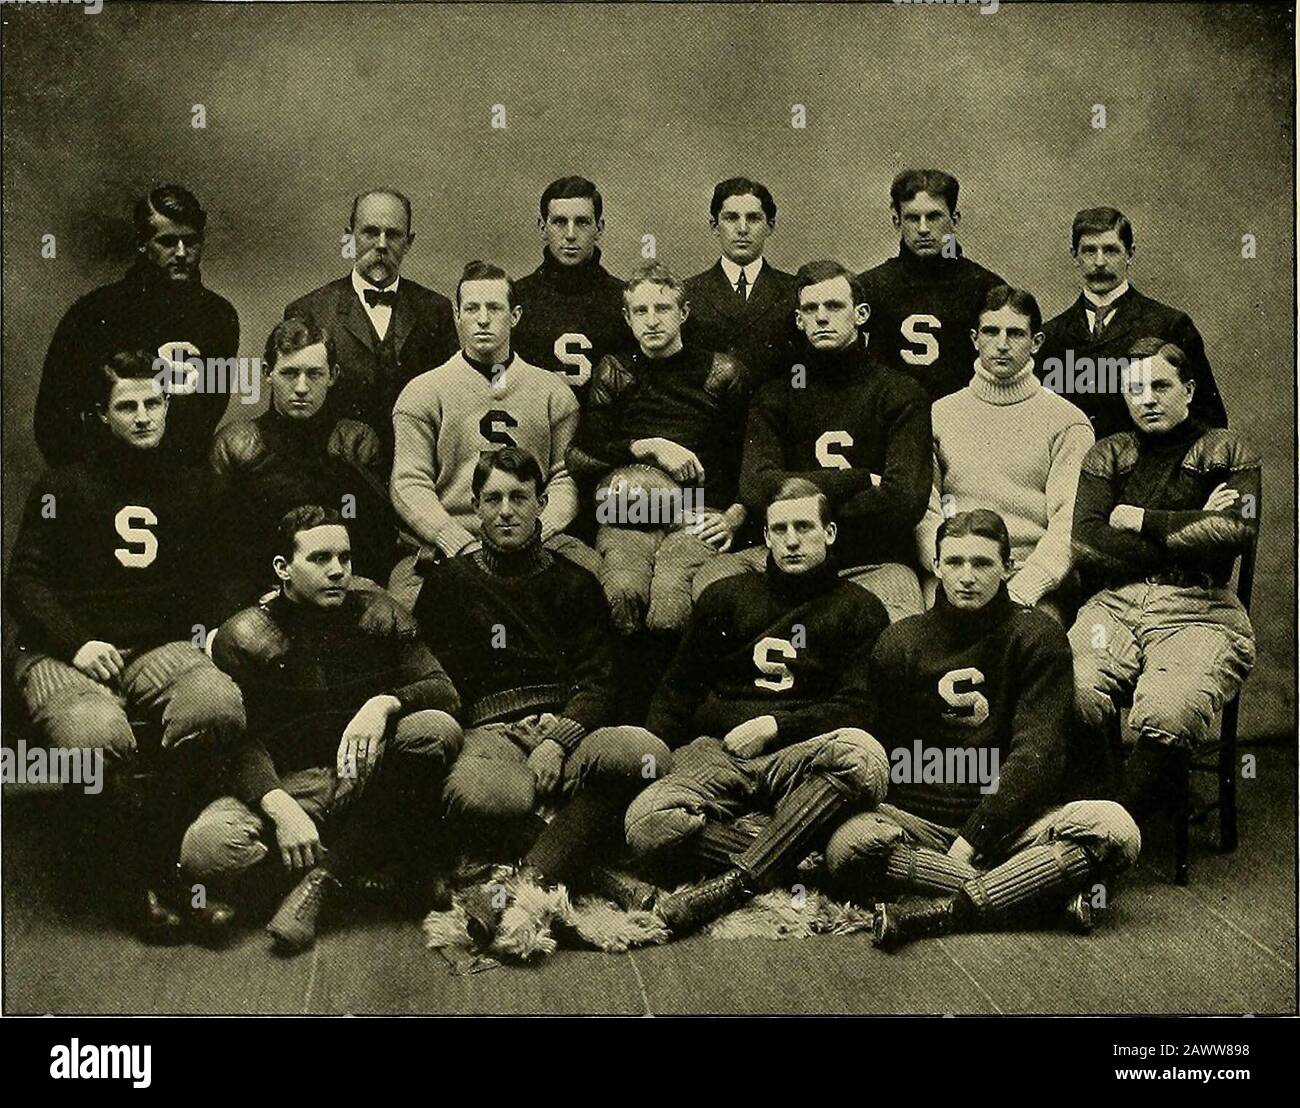 Halcyon . LLECTRIC CITY. FOOT-BALL TEAM. Swartbmore CoUcge jfooUball ^eam Seaeon 1903 Centre:Orrin H. Markel. Left Guard:Ralph G. Jackson. Left End:Charles R. Carr. Left Tackle:Frederick G. Bell. Right Guard:James J. Lippincott. Right Taekle: Right End: RoscoE W. Smith. Chester B. Bower, Left Half-back:William D. Smith, Captain. Manager:Frederic E. Griest. T. H. Dudley Perkins,Spencer L. Coxe,Walter S. Gee, Onartcr-back:Wilmer G. Crowell. Full-back:Samuel Sinclair. Right Half-back:Philip E. Lamb. Coach:George H. Brooke, 93. Substitutes: William R. A. McDonough,Nathaniel U. Hill,Edwin .. Cottr Stock Photo